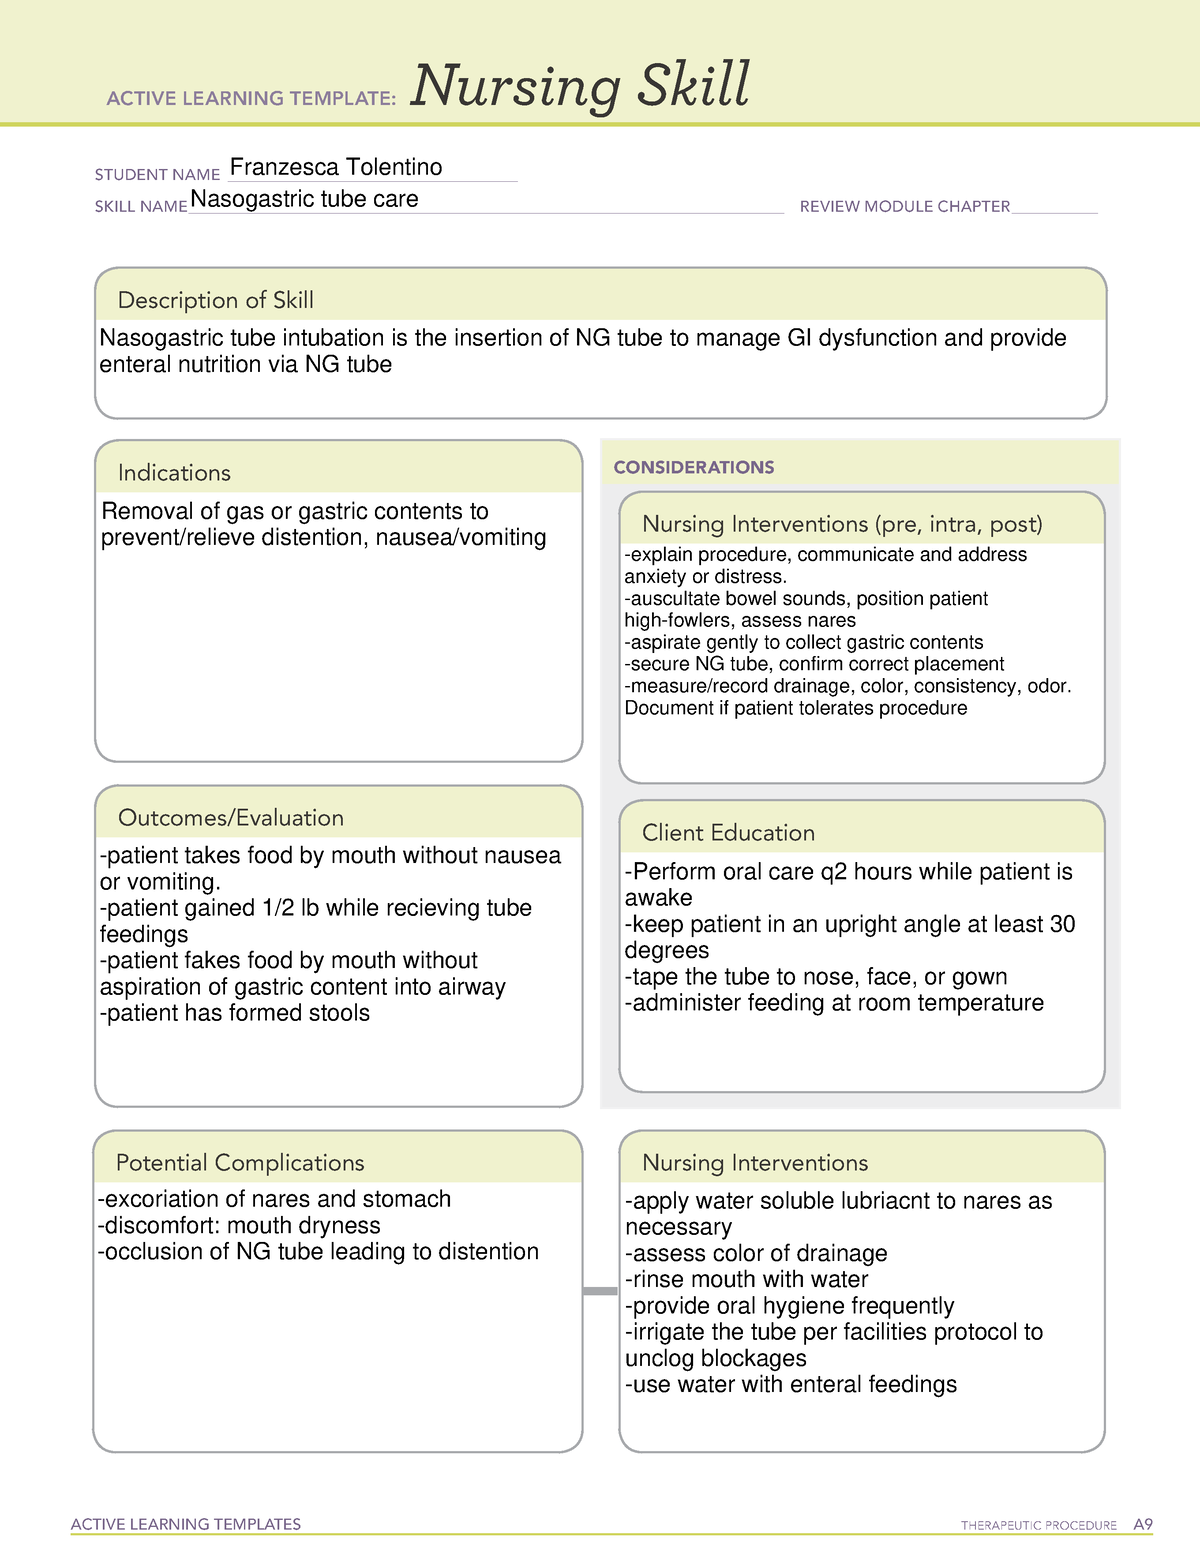 active-learning-template-nursing-skill-form-ngtubecare-active